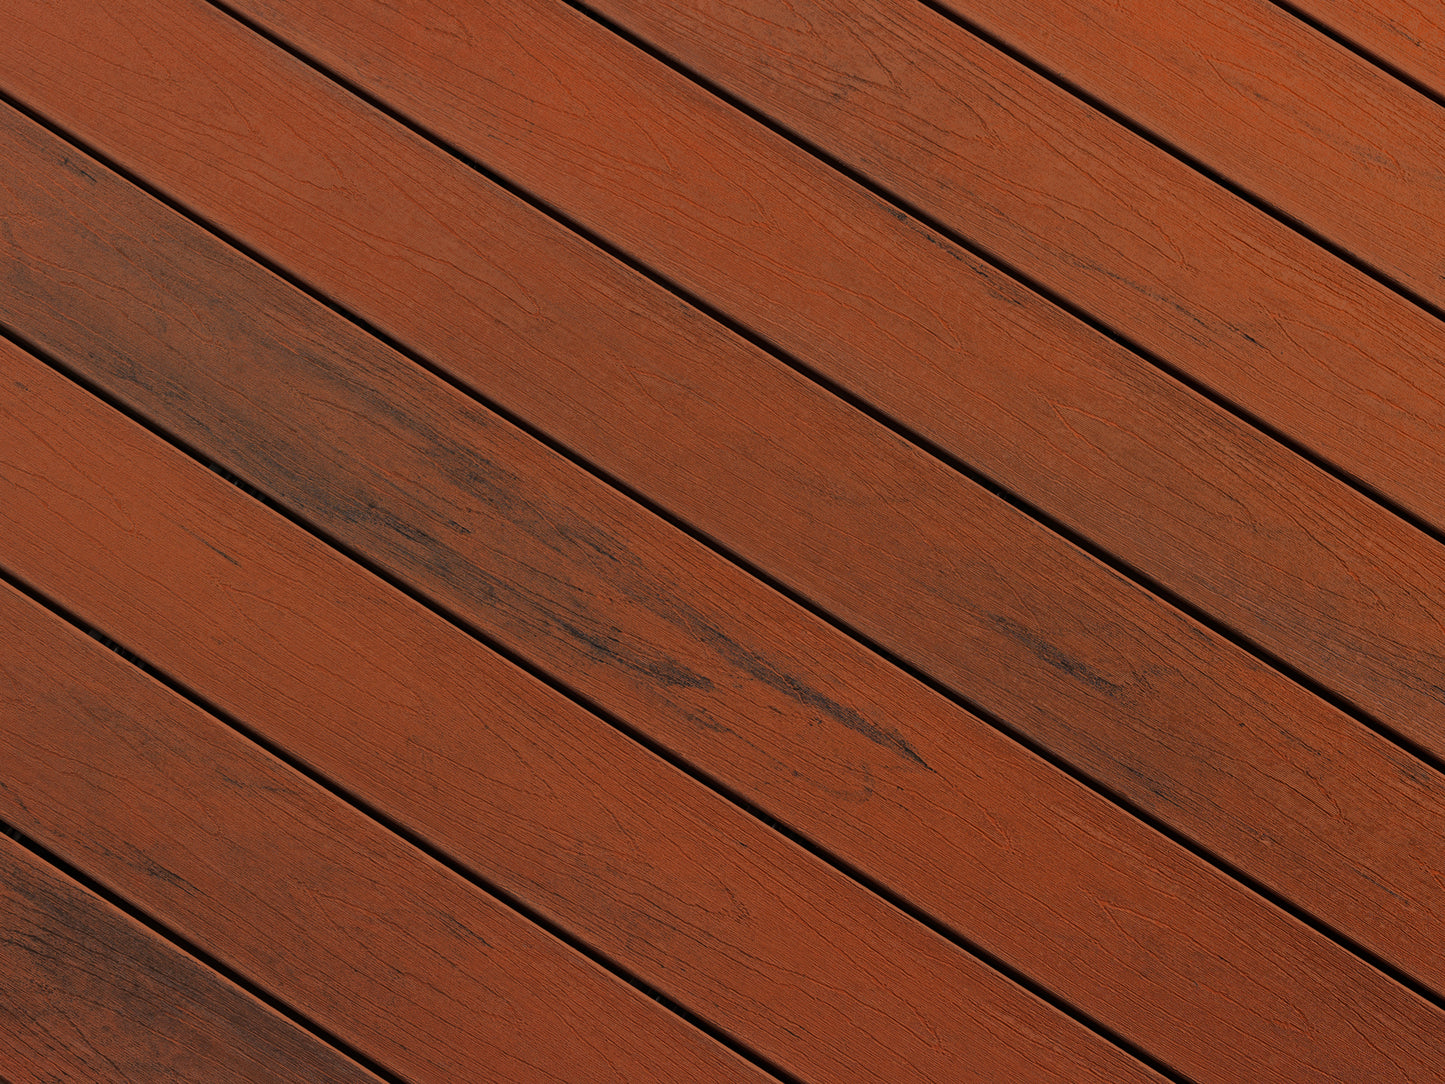 TruNorth Enviroboard Composite Decking - Variegated Colours (1"x5-1/8") | From $3.45/ft